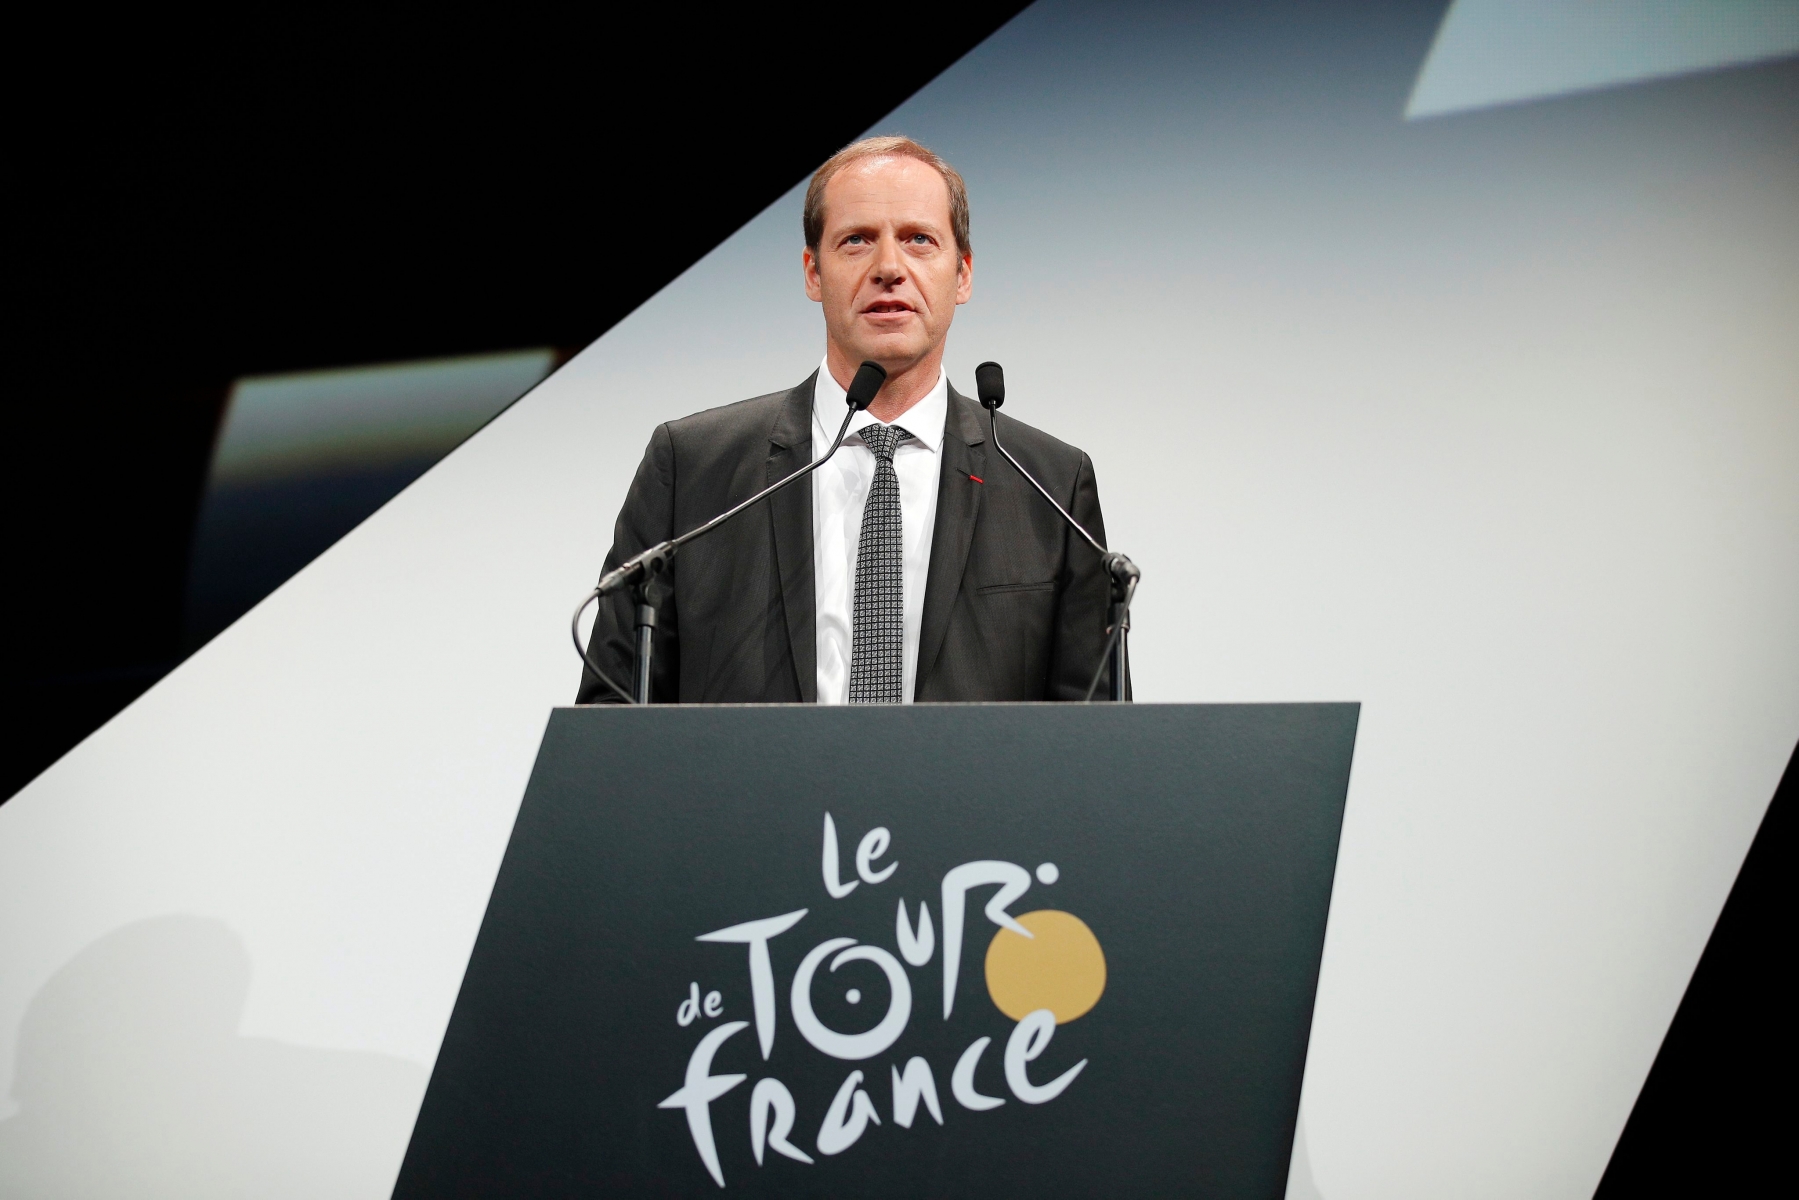 epa05590102 Tour de France General Director Christian Prudhomme delivers his speech during the presentation of the Tour de France 2017, in Paris, France, 18 October 2016. The 104th edition of the Tour de France cycling race will start on 01 July from Dusseldorf, Germany and arrive in Paris on 23 July 2016.  EPA/YOAN VALAT FRANCE CYCLING TOUR DE FRANCE 2017 PRESENTATION